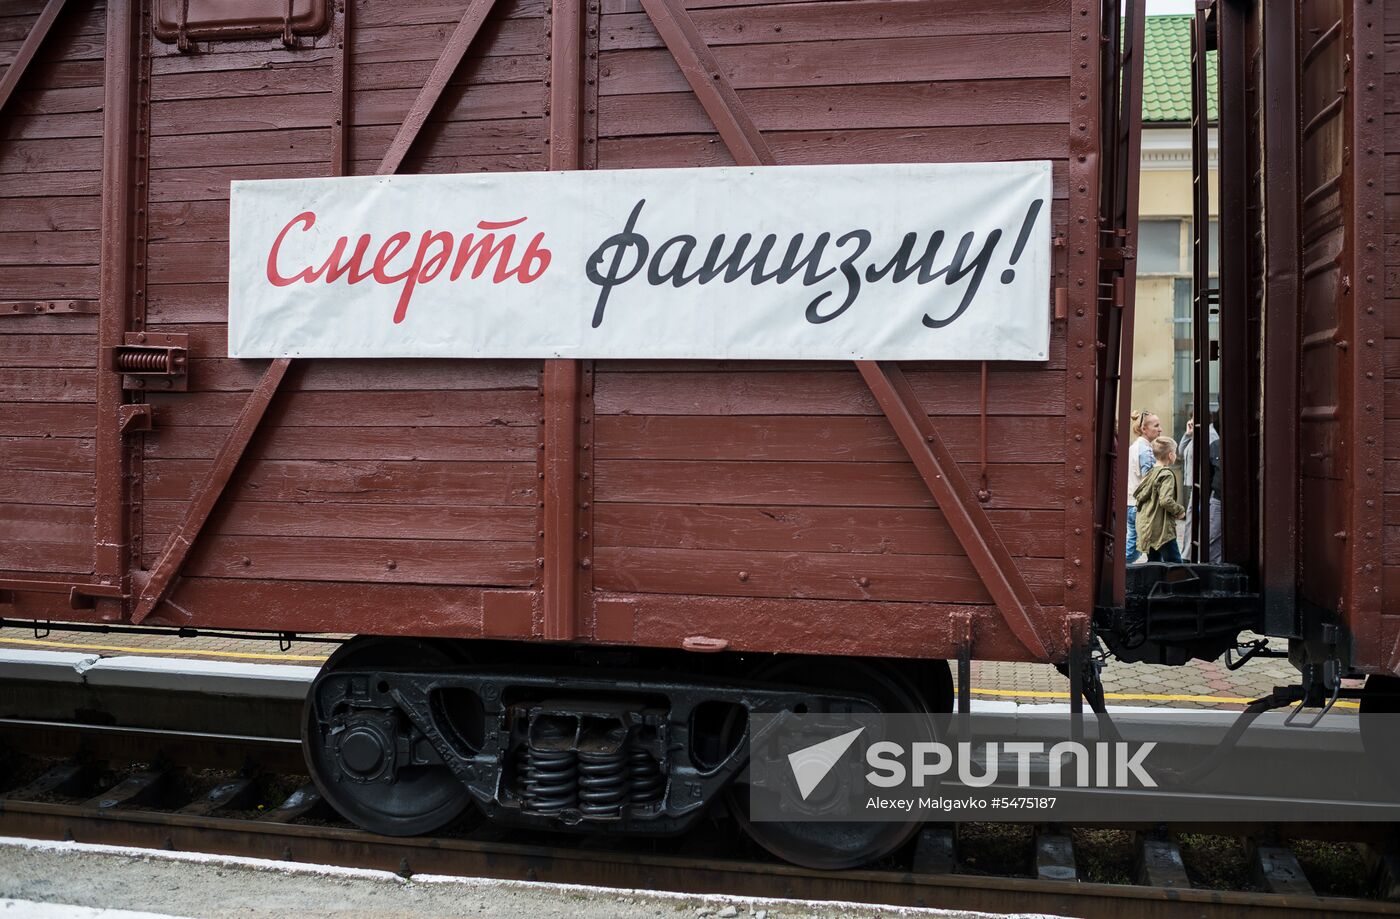 Patriotic action Train of Victory in Crimea